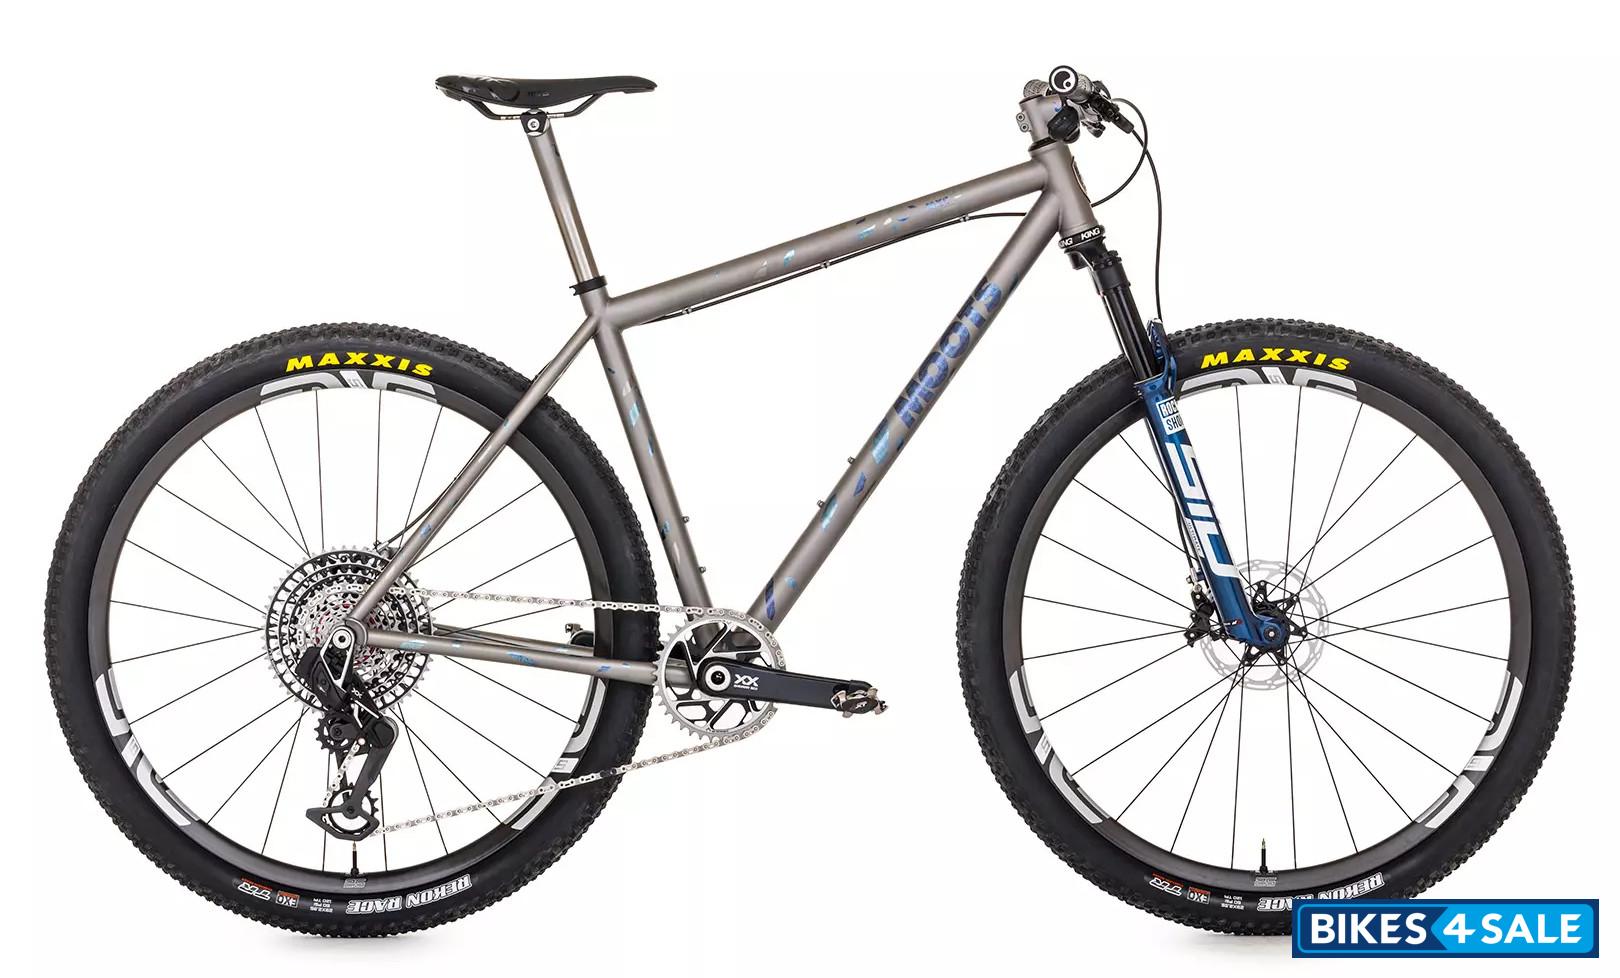 Moots Mxc Full Details